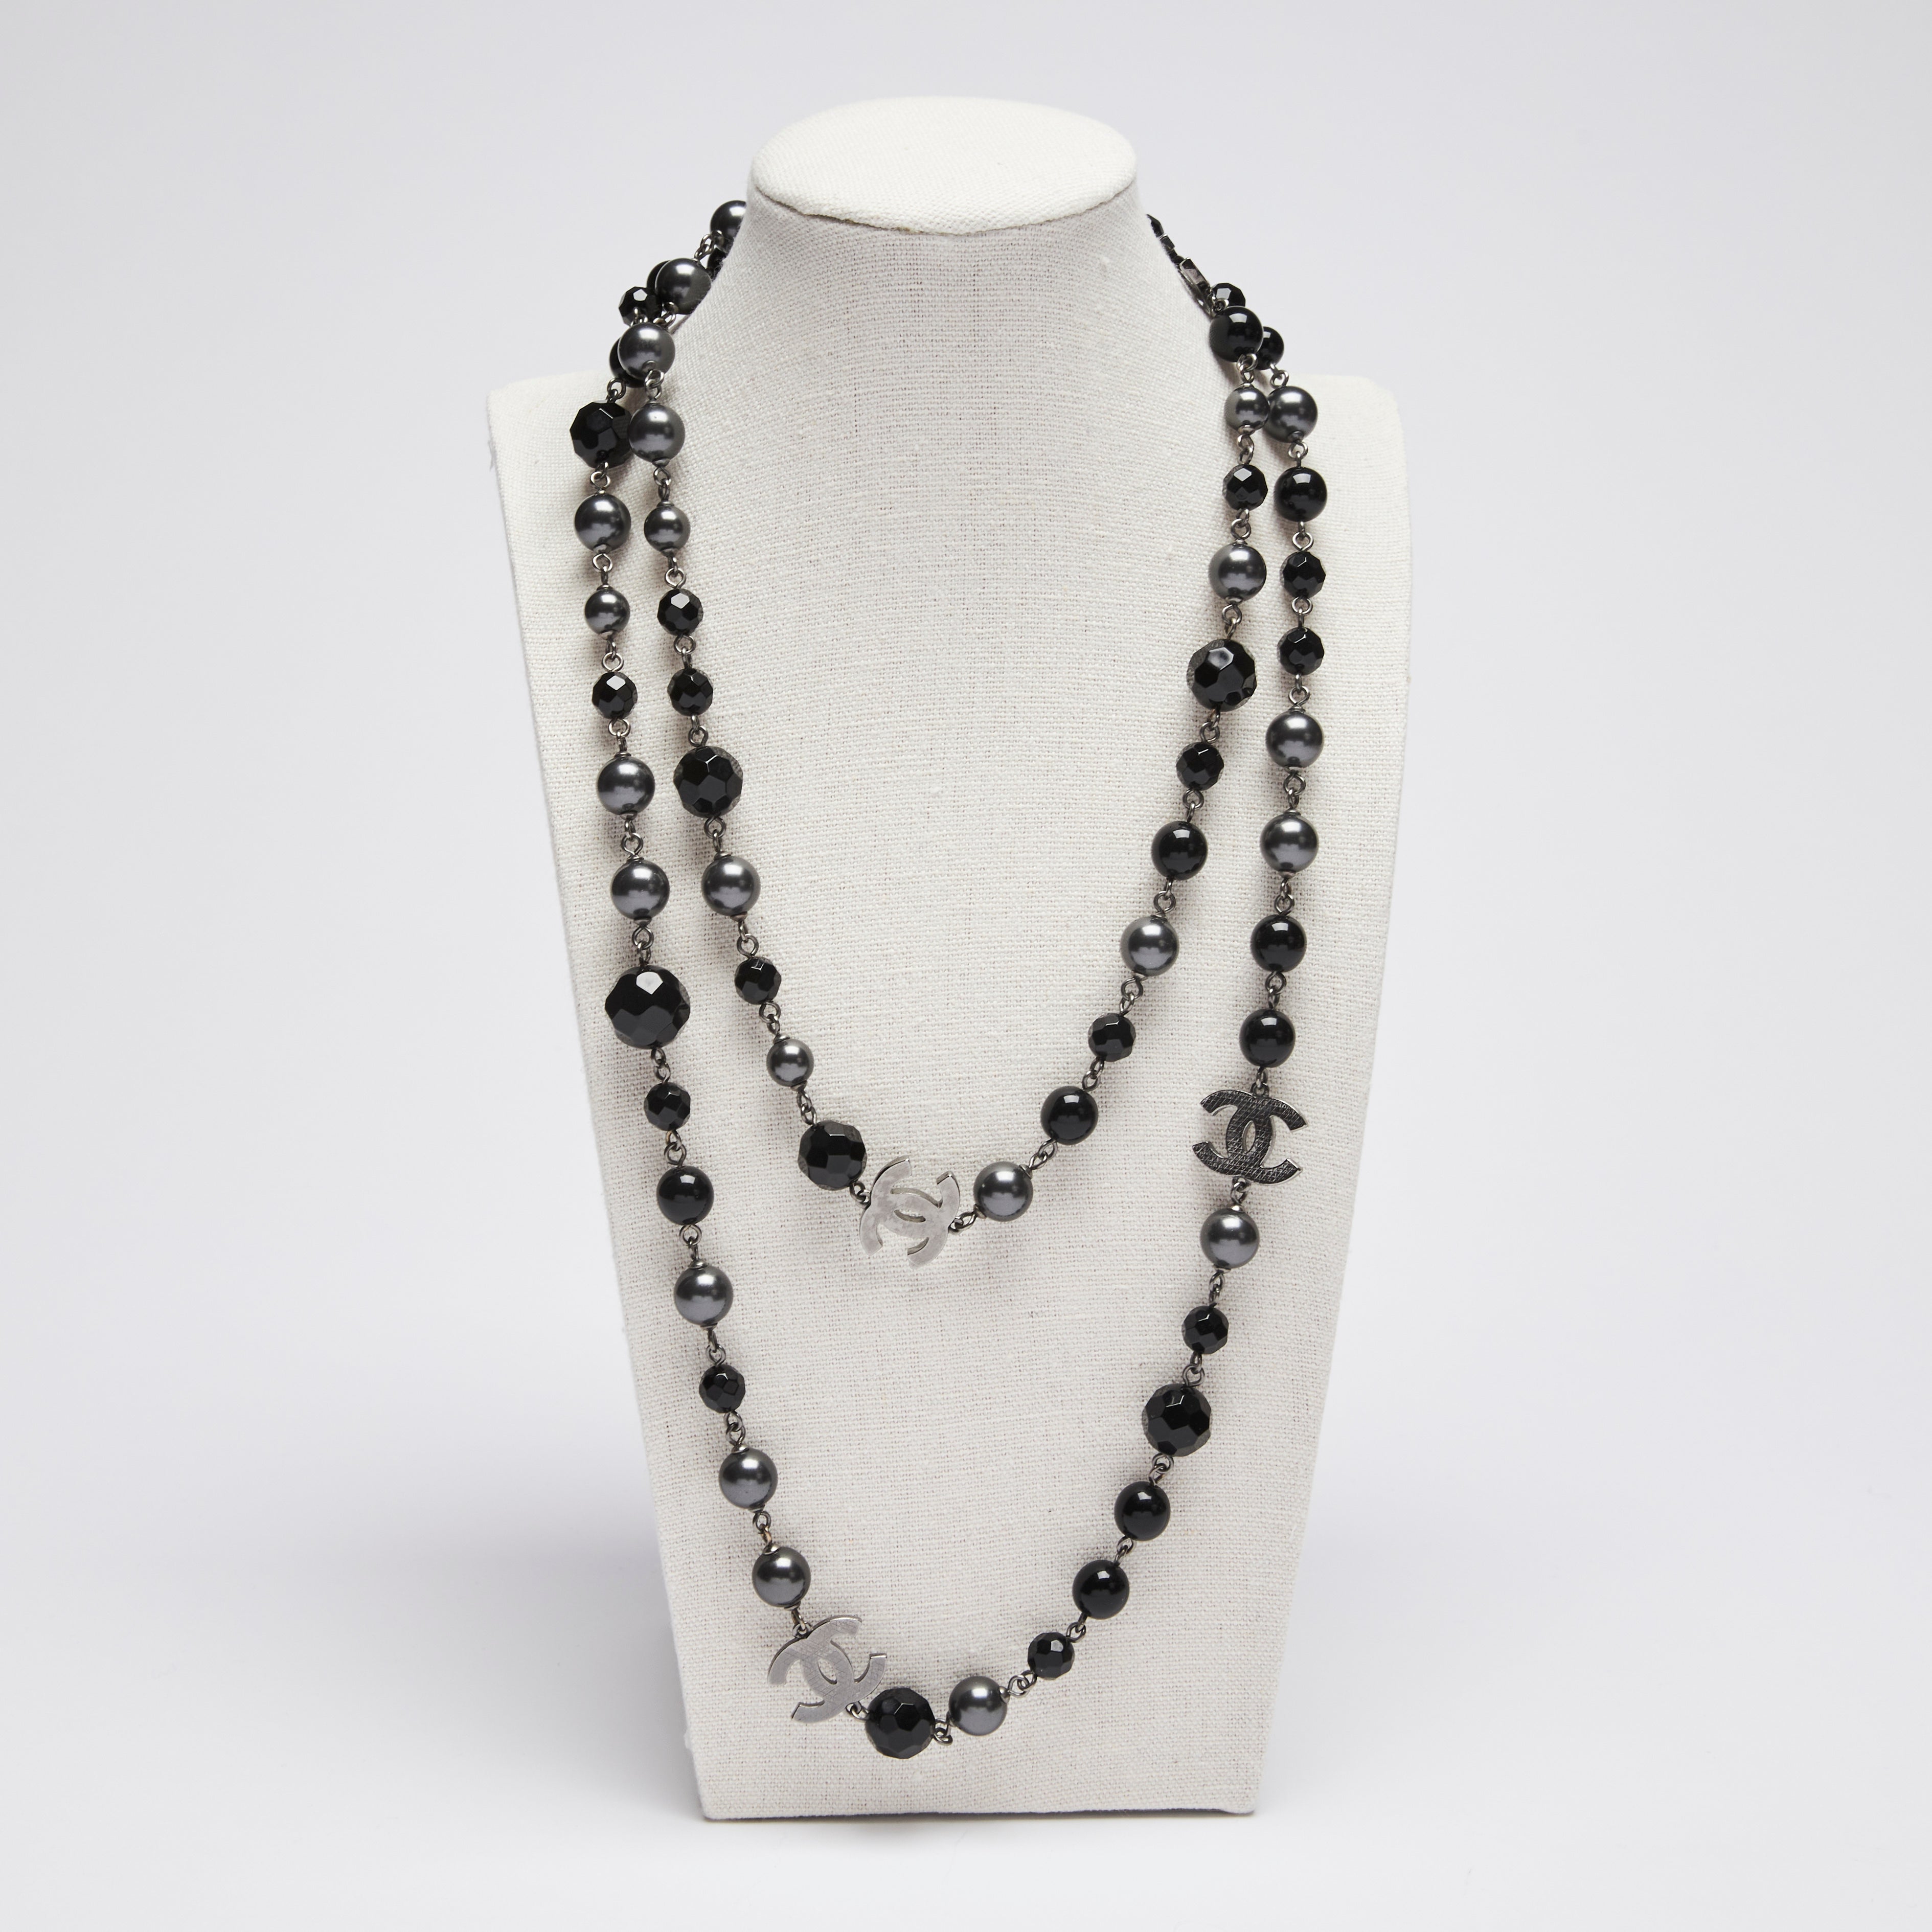 Chanel Black Bead and Pearl Dark Silver Long Necklace